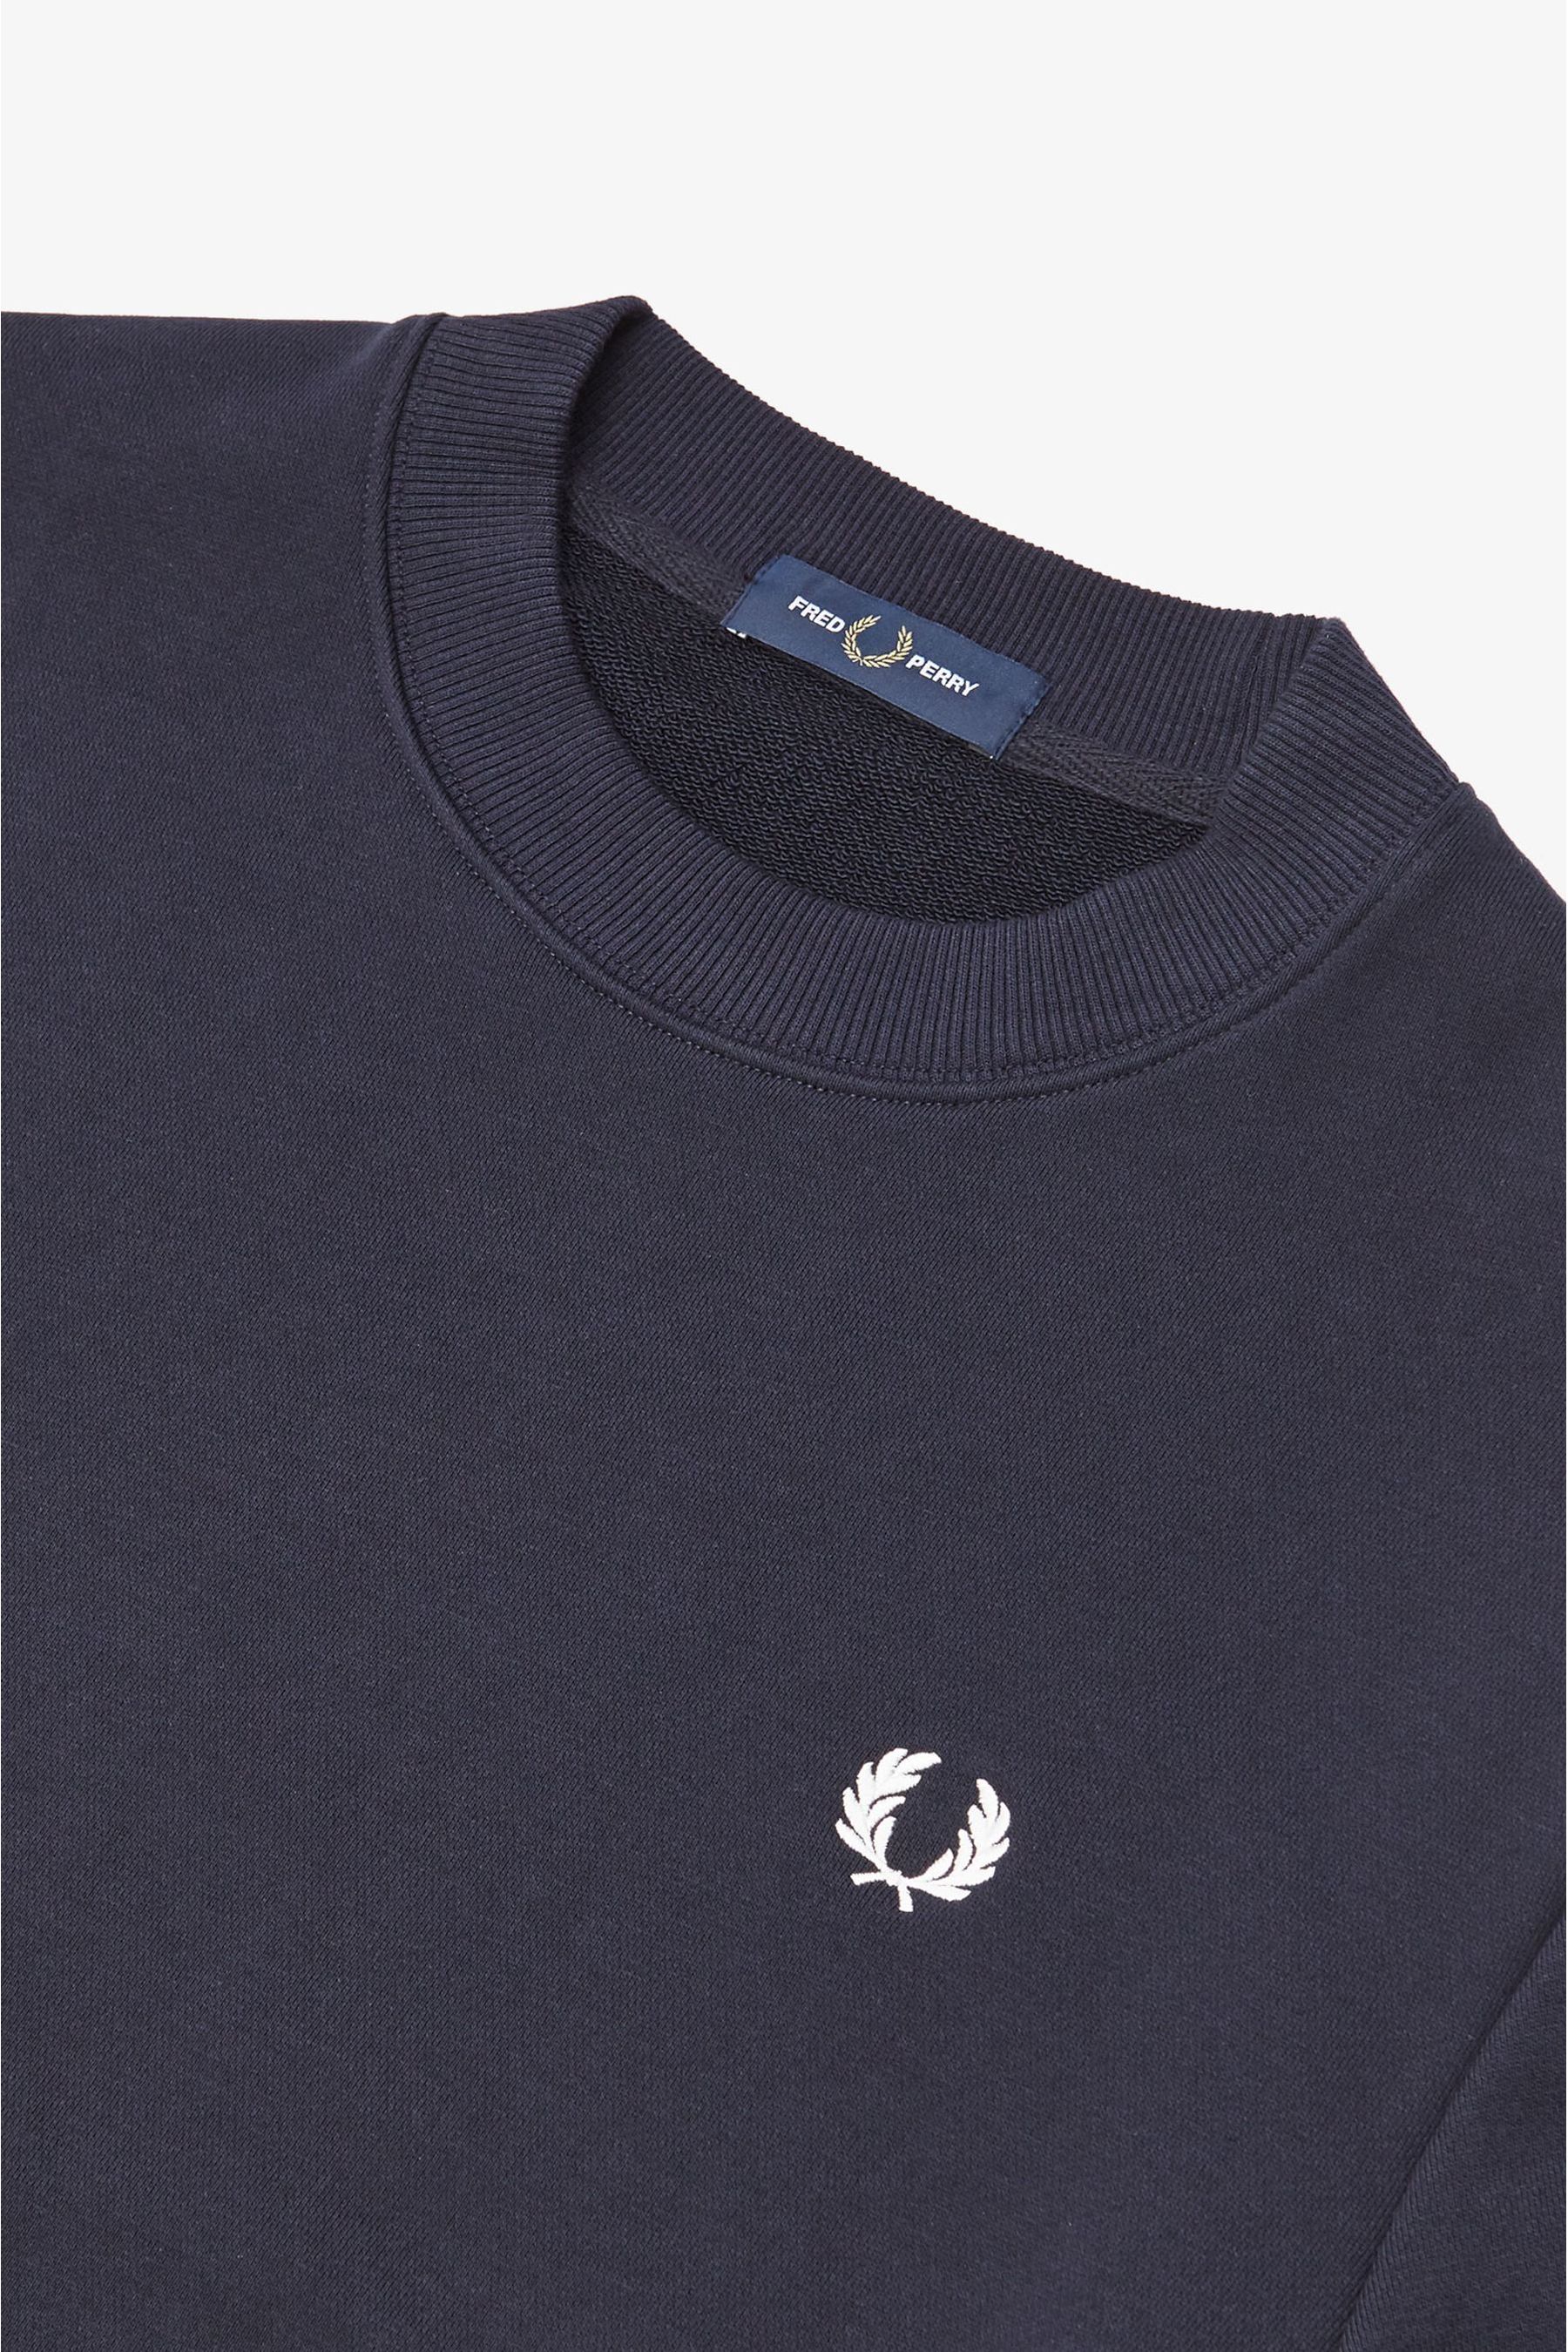 Buy Fred Perry Crew Neck Sweatshirt from the Next UK online shop